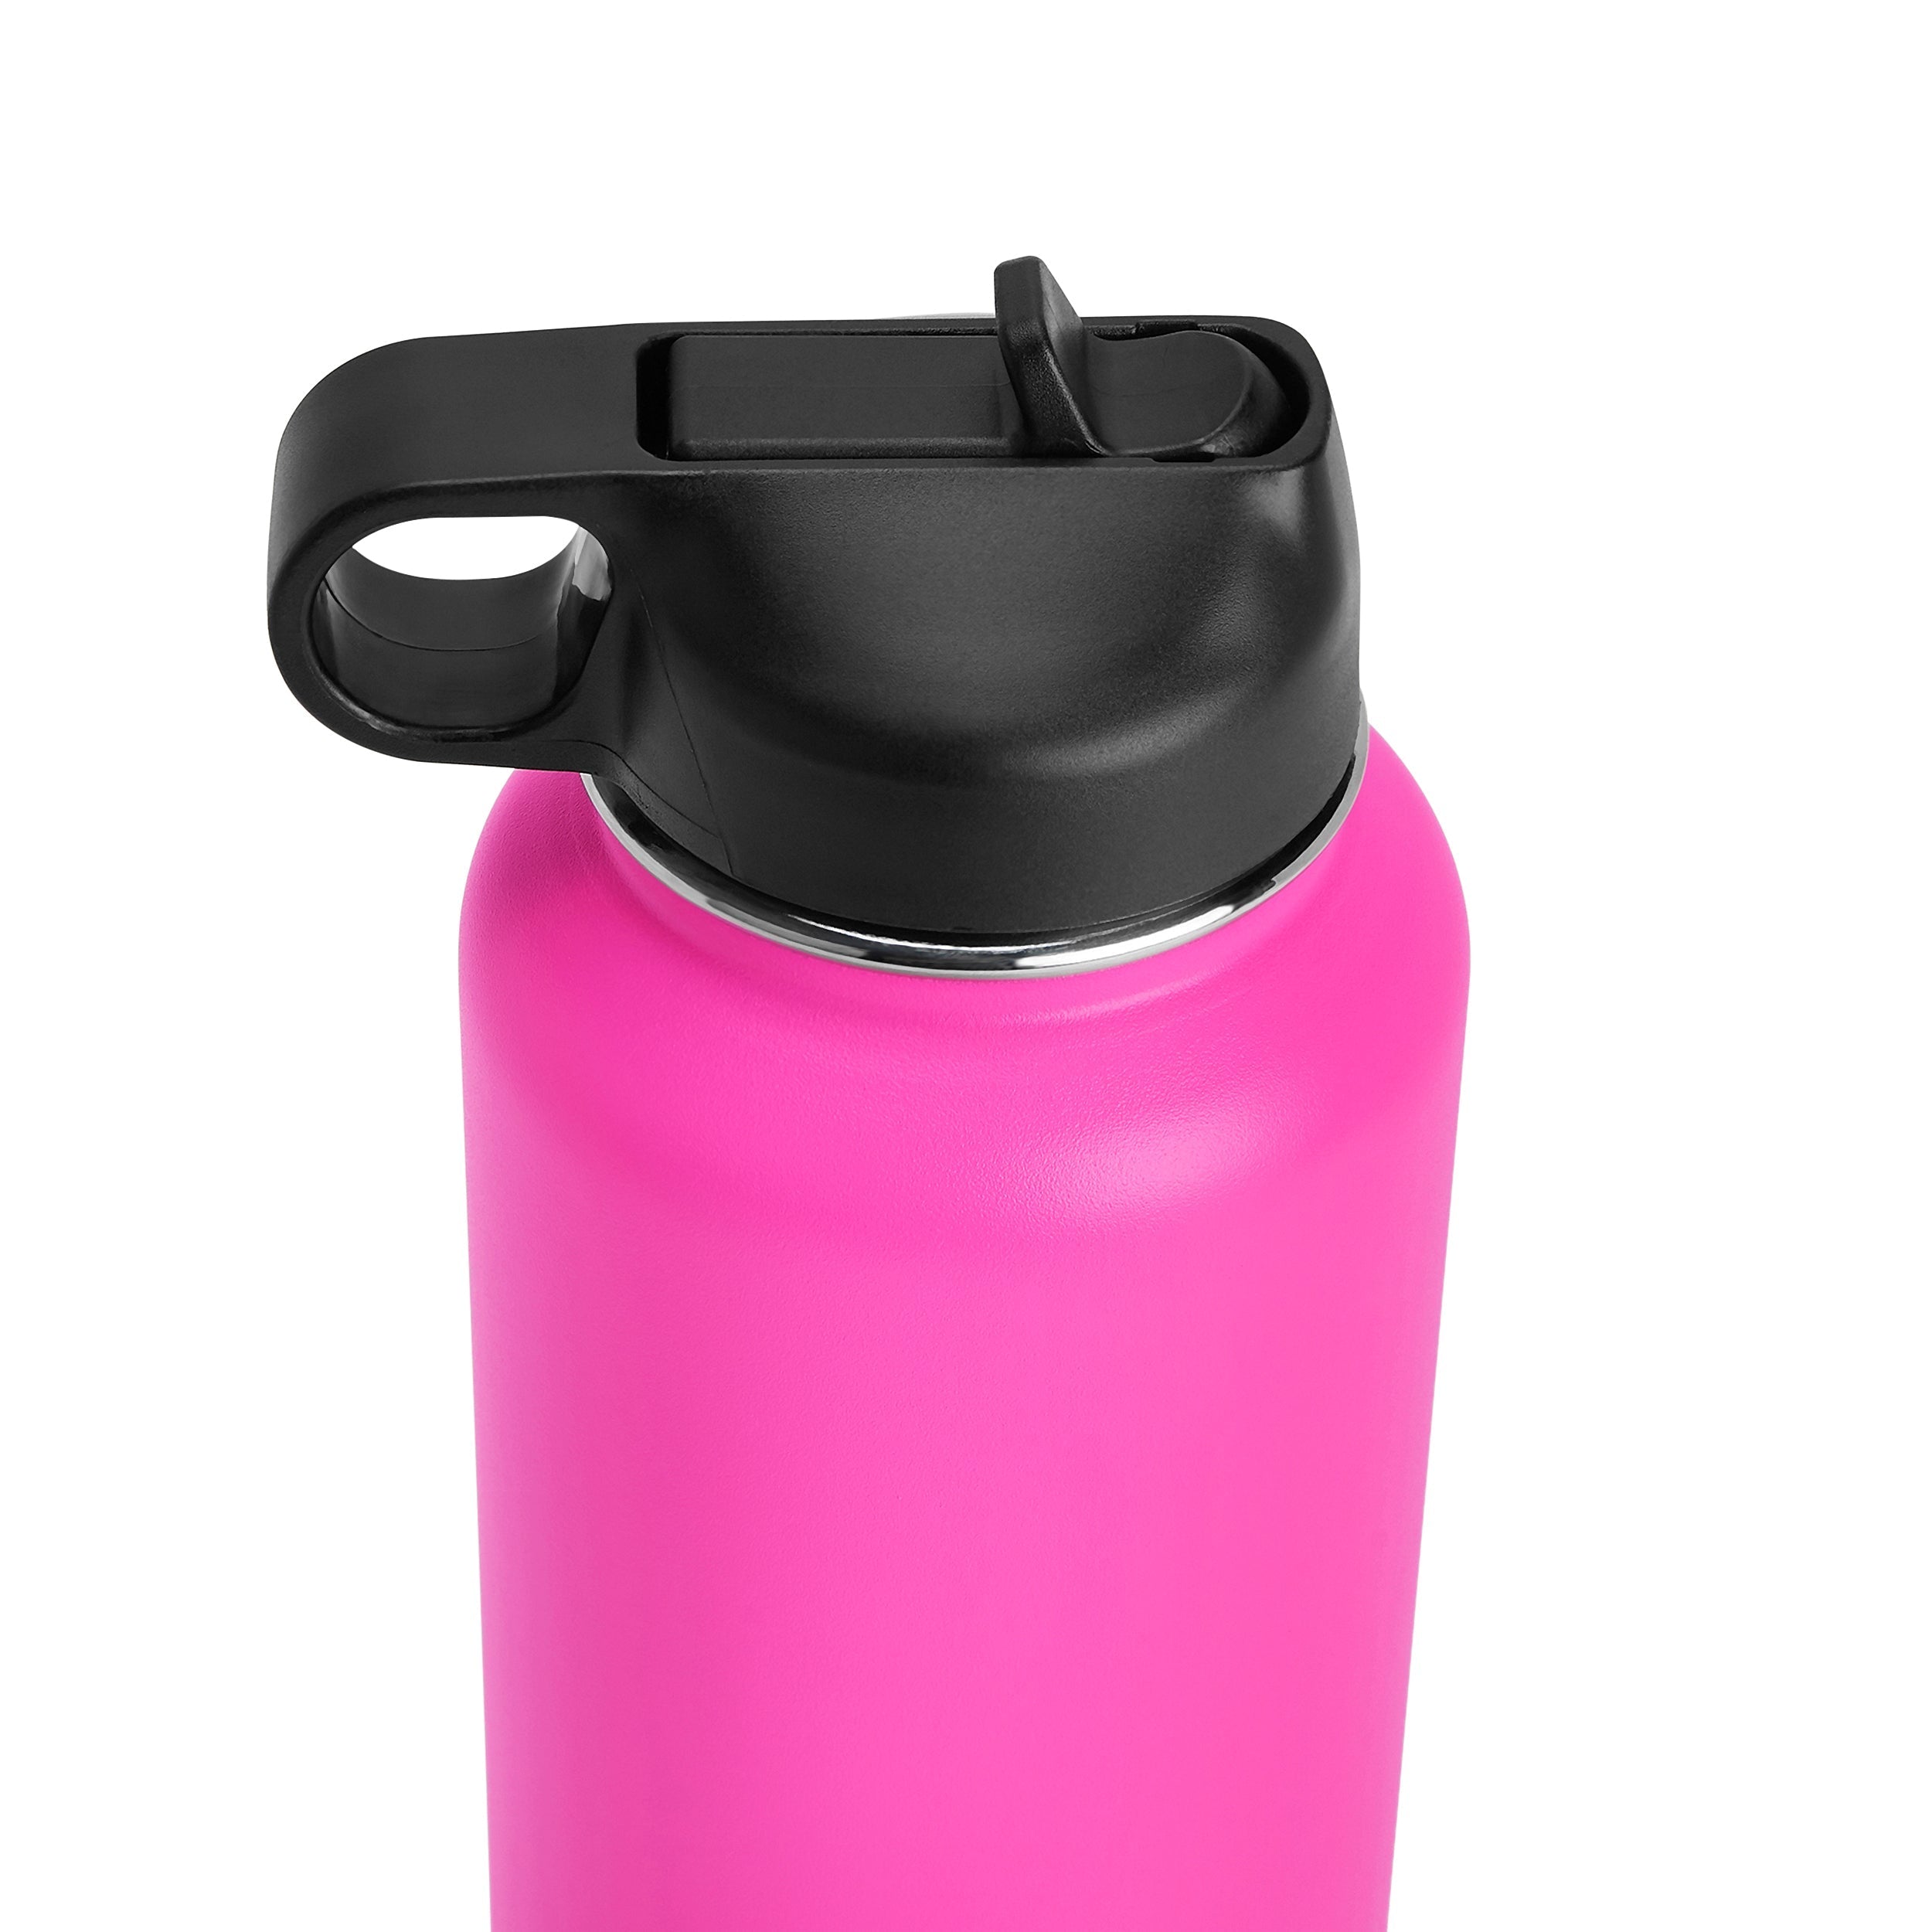 32oz Hydro Water Bottle for Breast Cancer Awareness